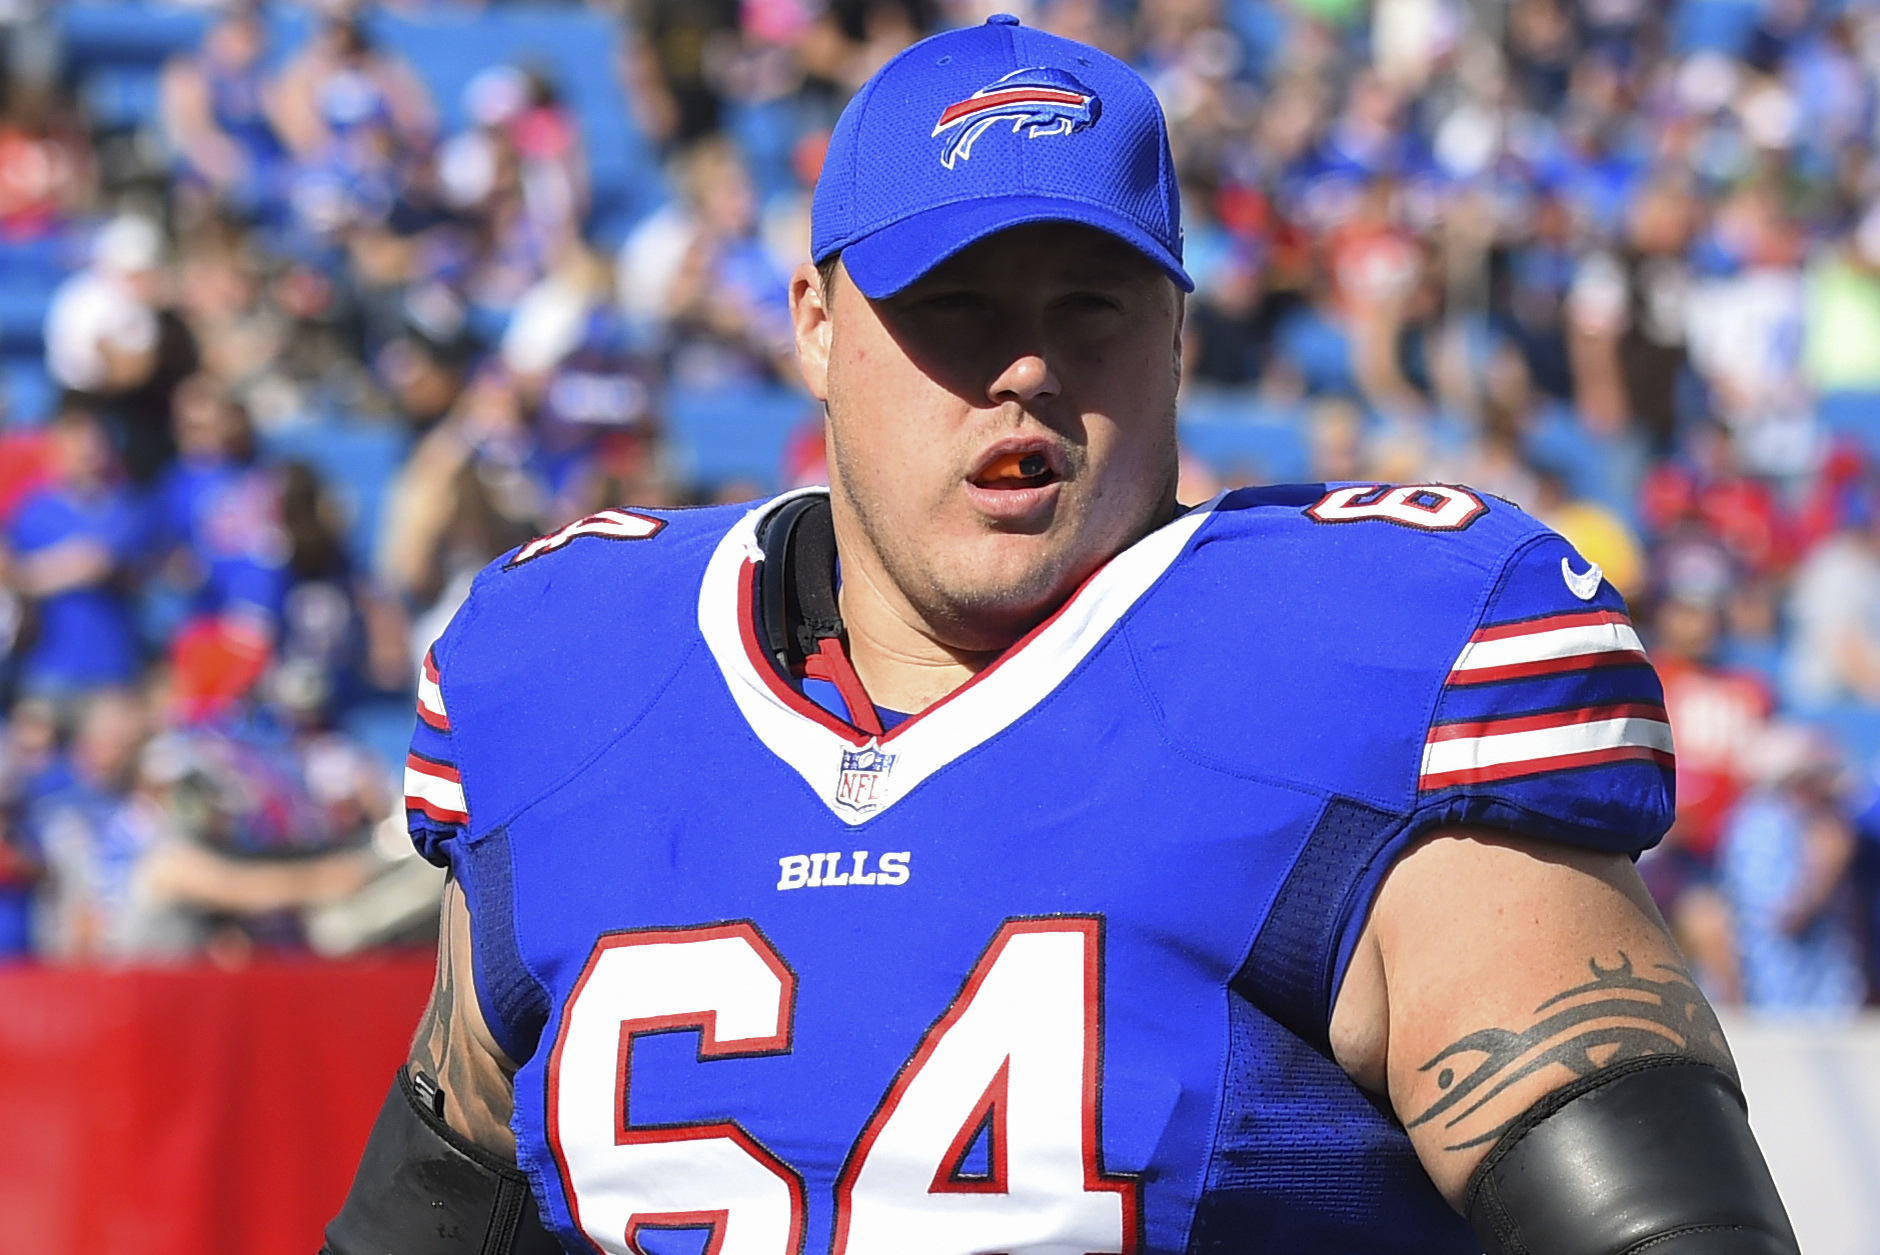 Real Sports with Bryant Gumbel: Richie Incognito on Funeral Home Arrest